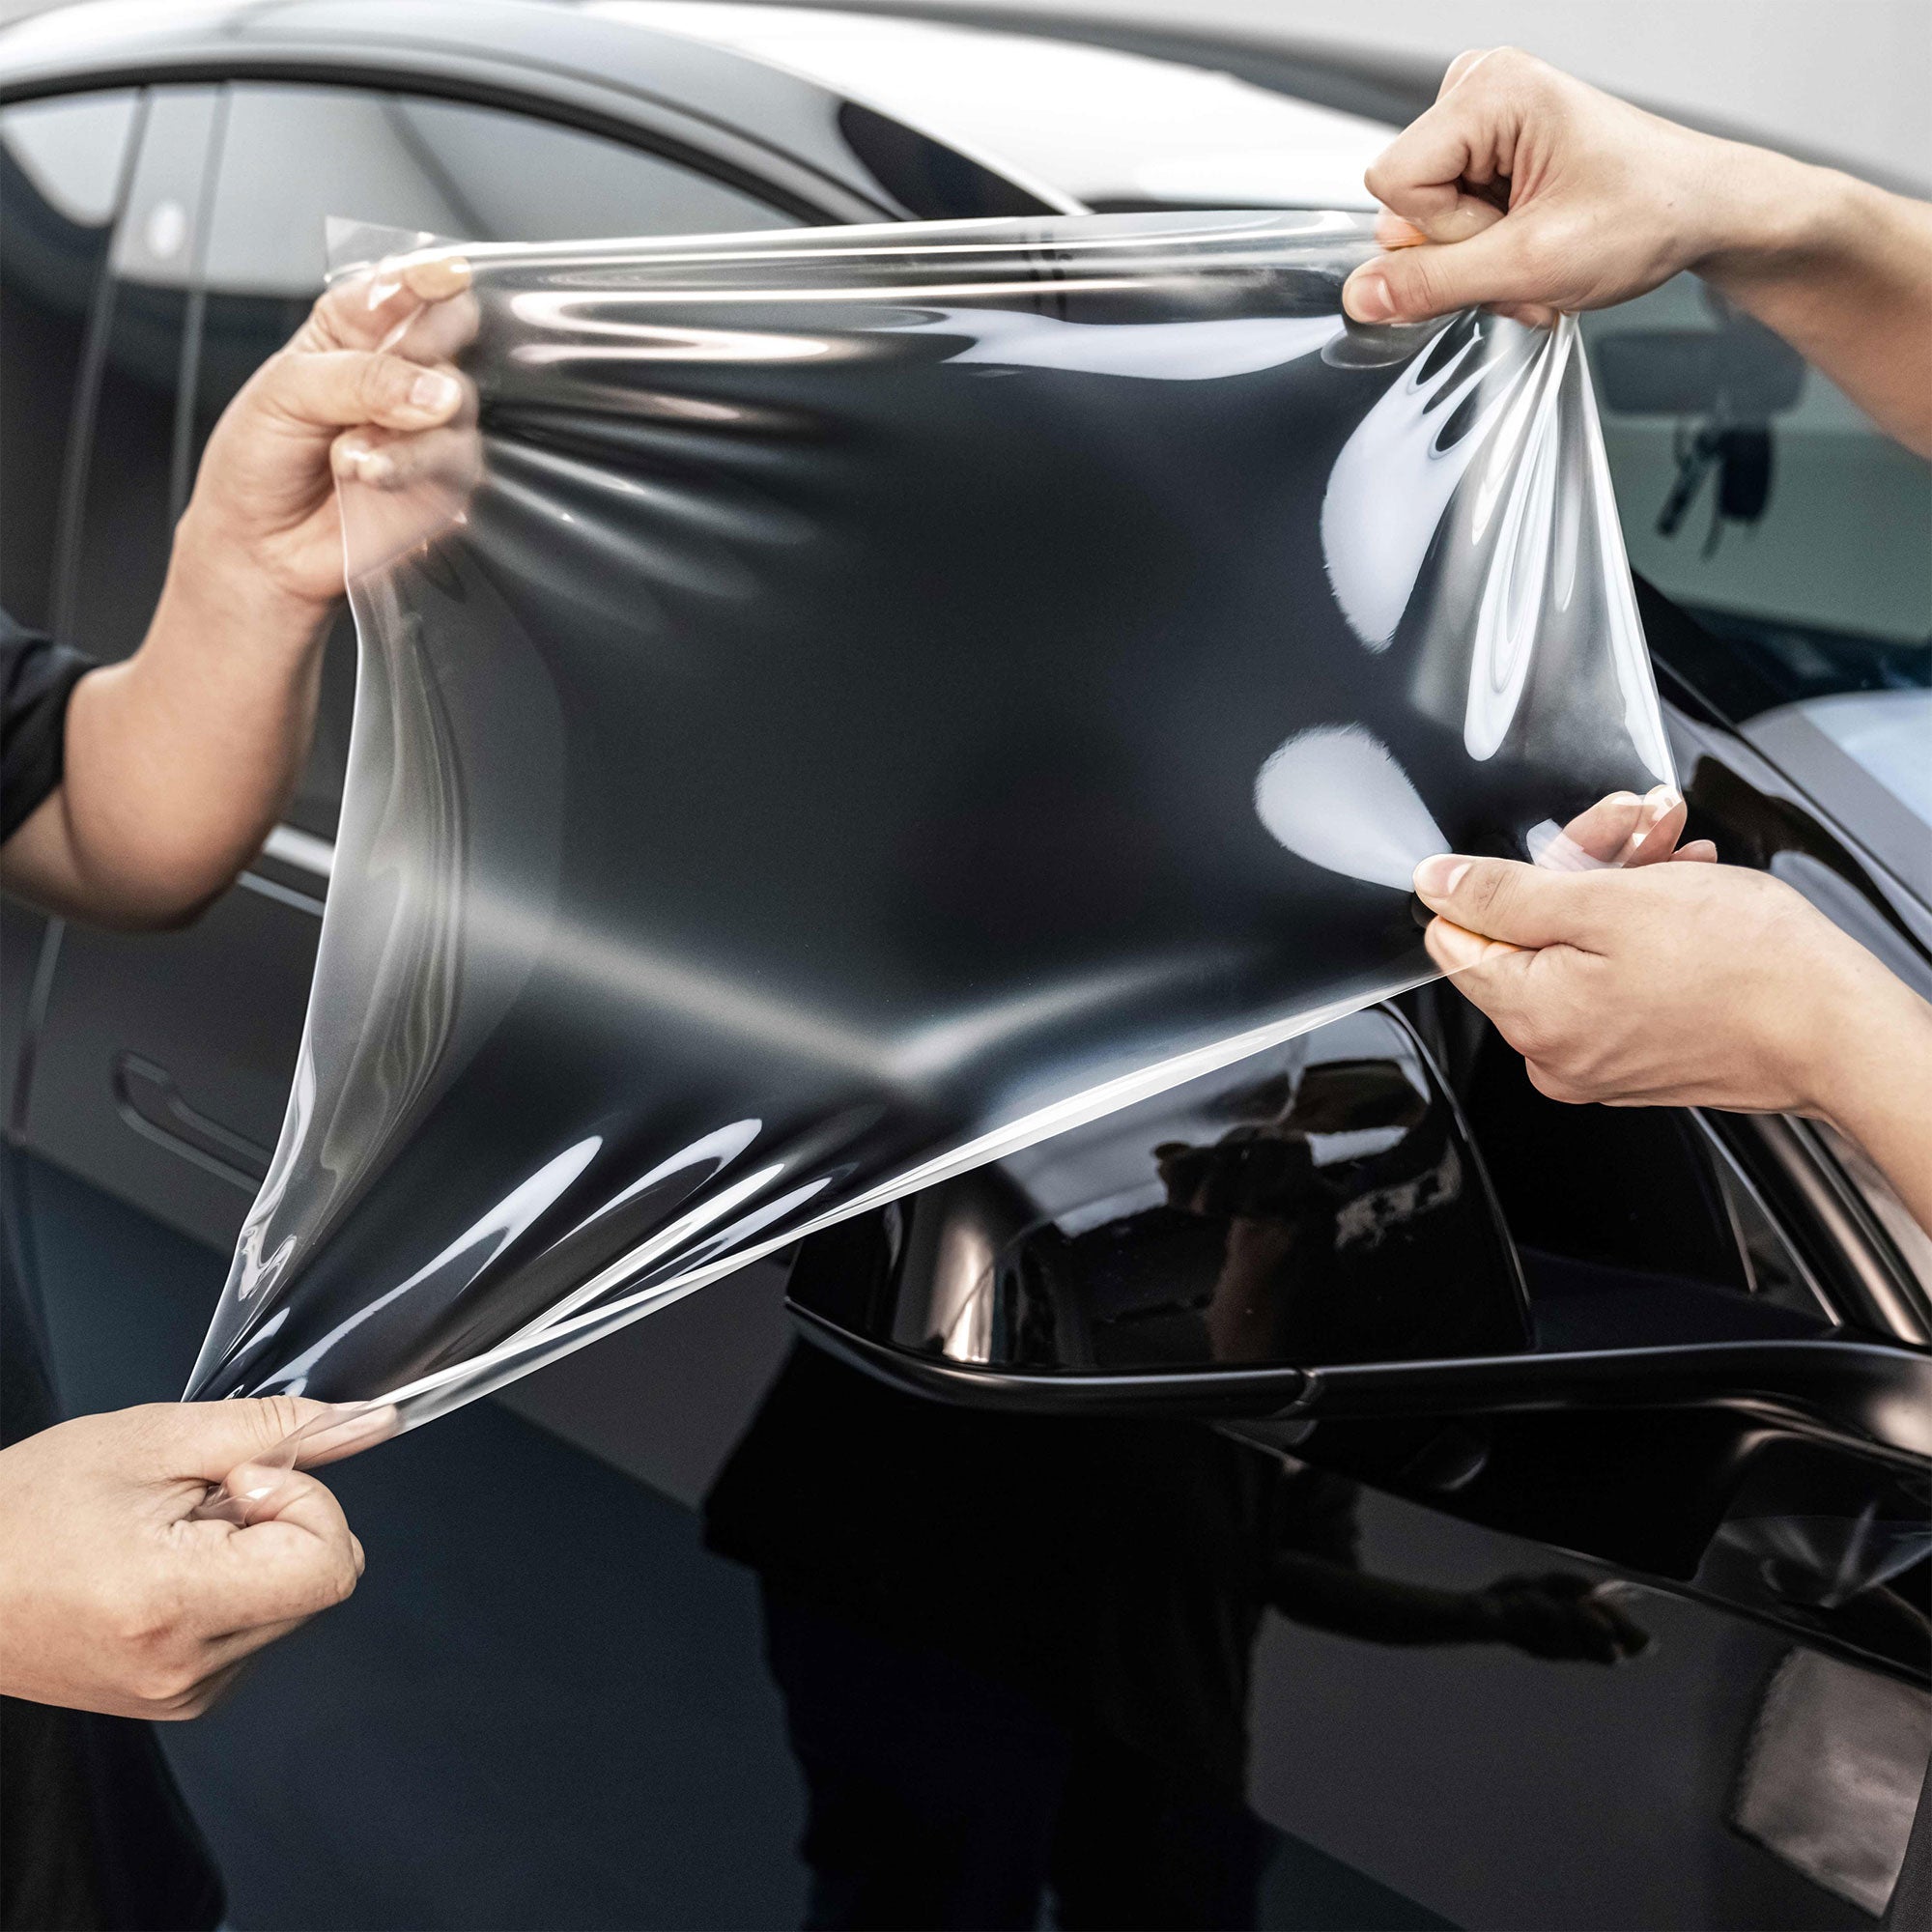 clear vinyl film wrap, clear vinyl film wrap Suppliers and Manufacturers at